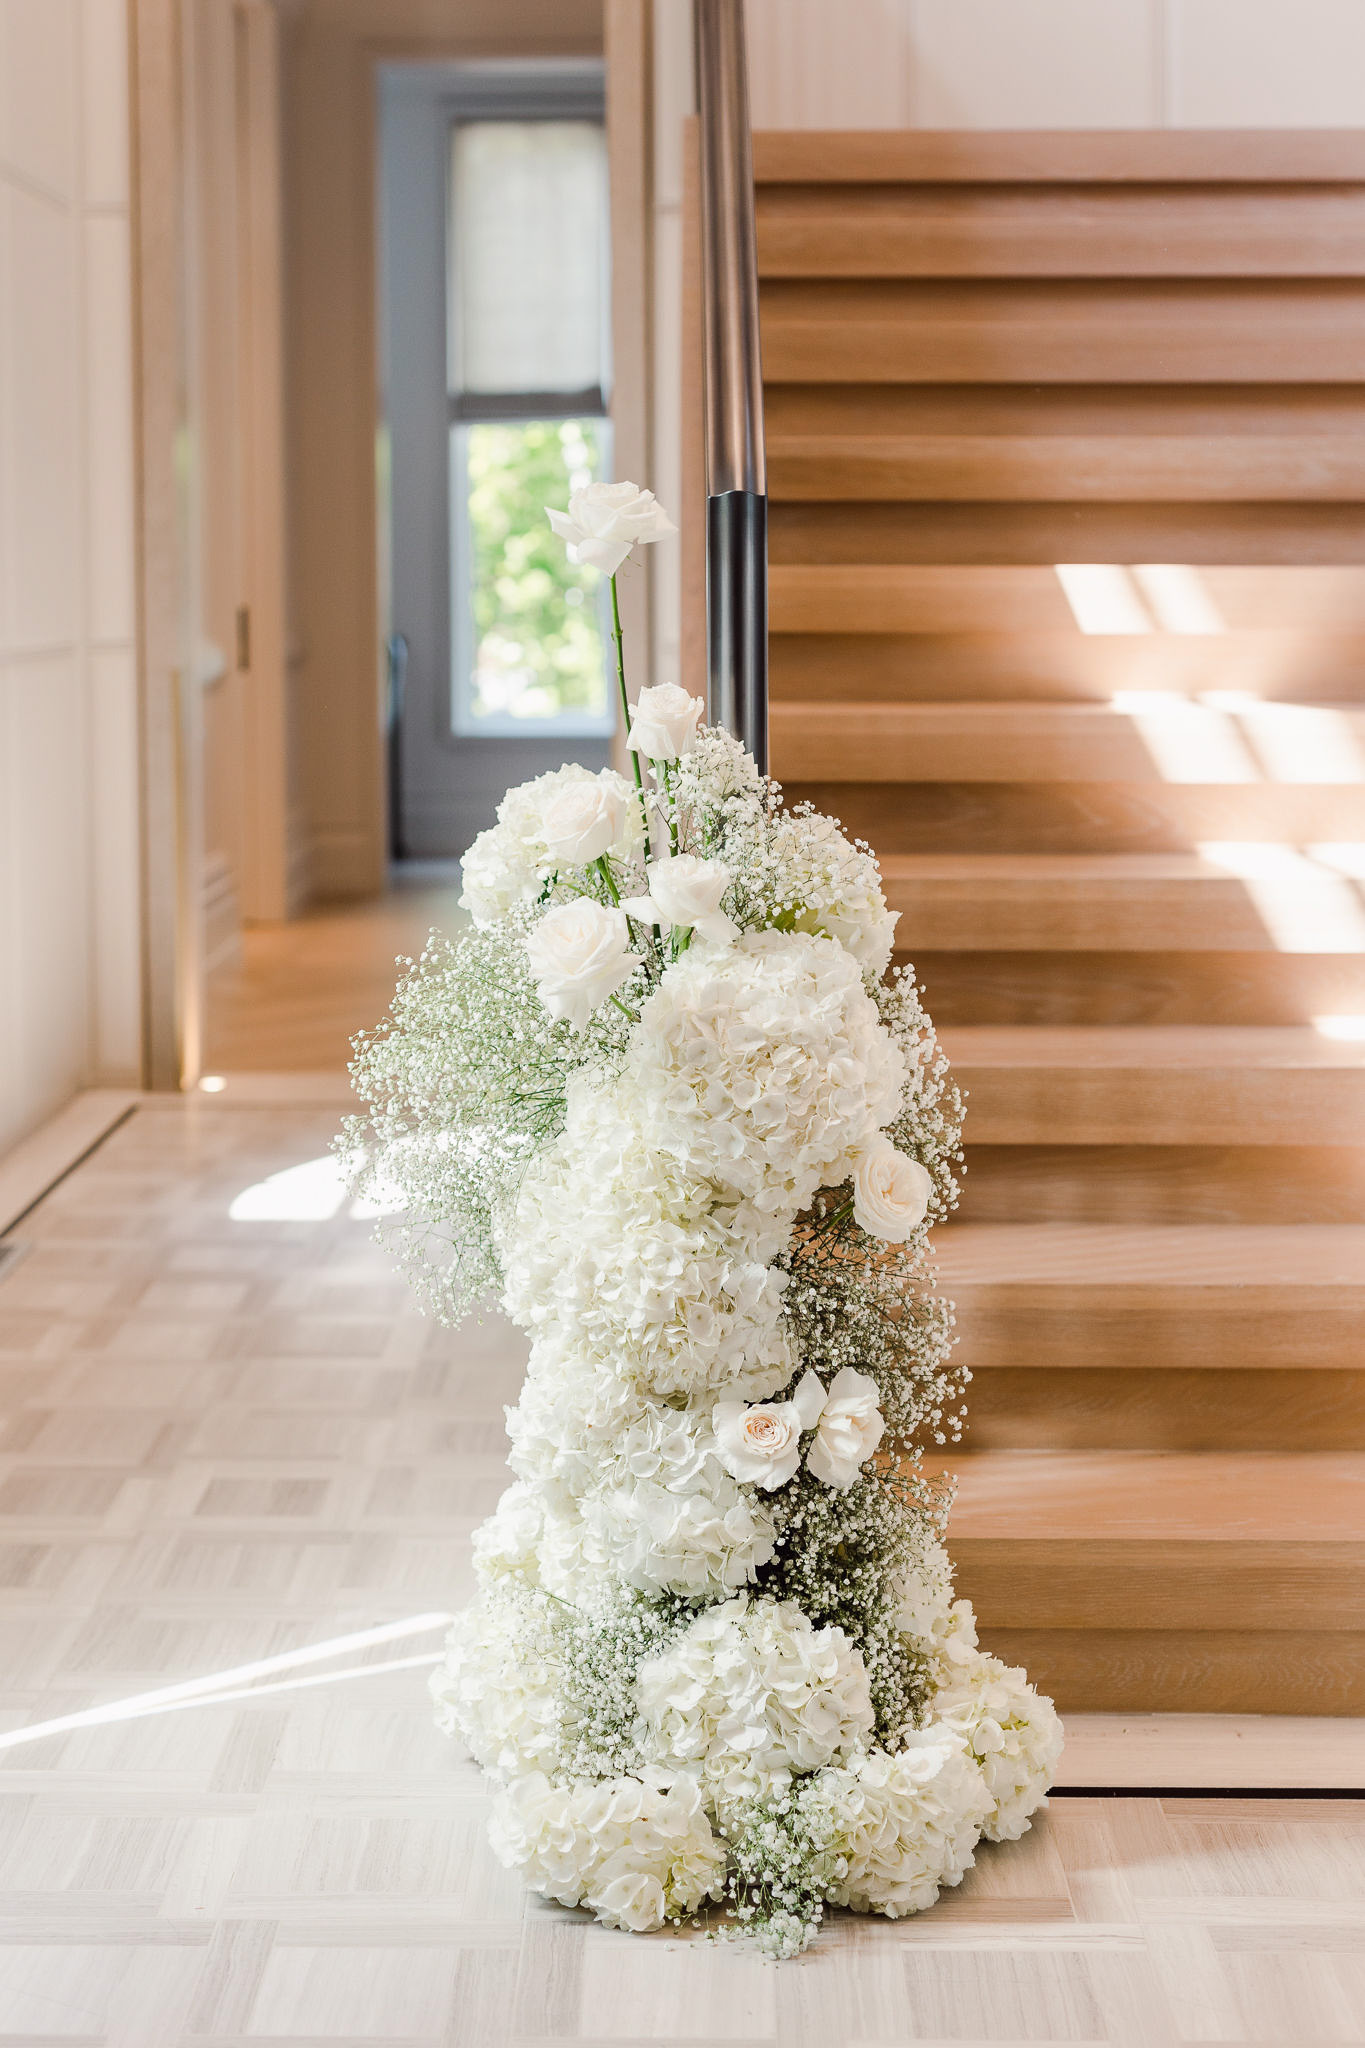 An arrangement of white flowers in front of a staircase.